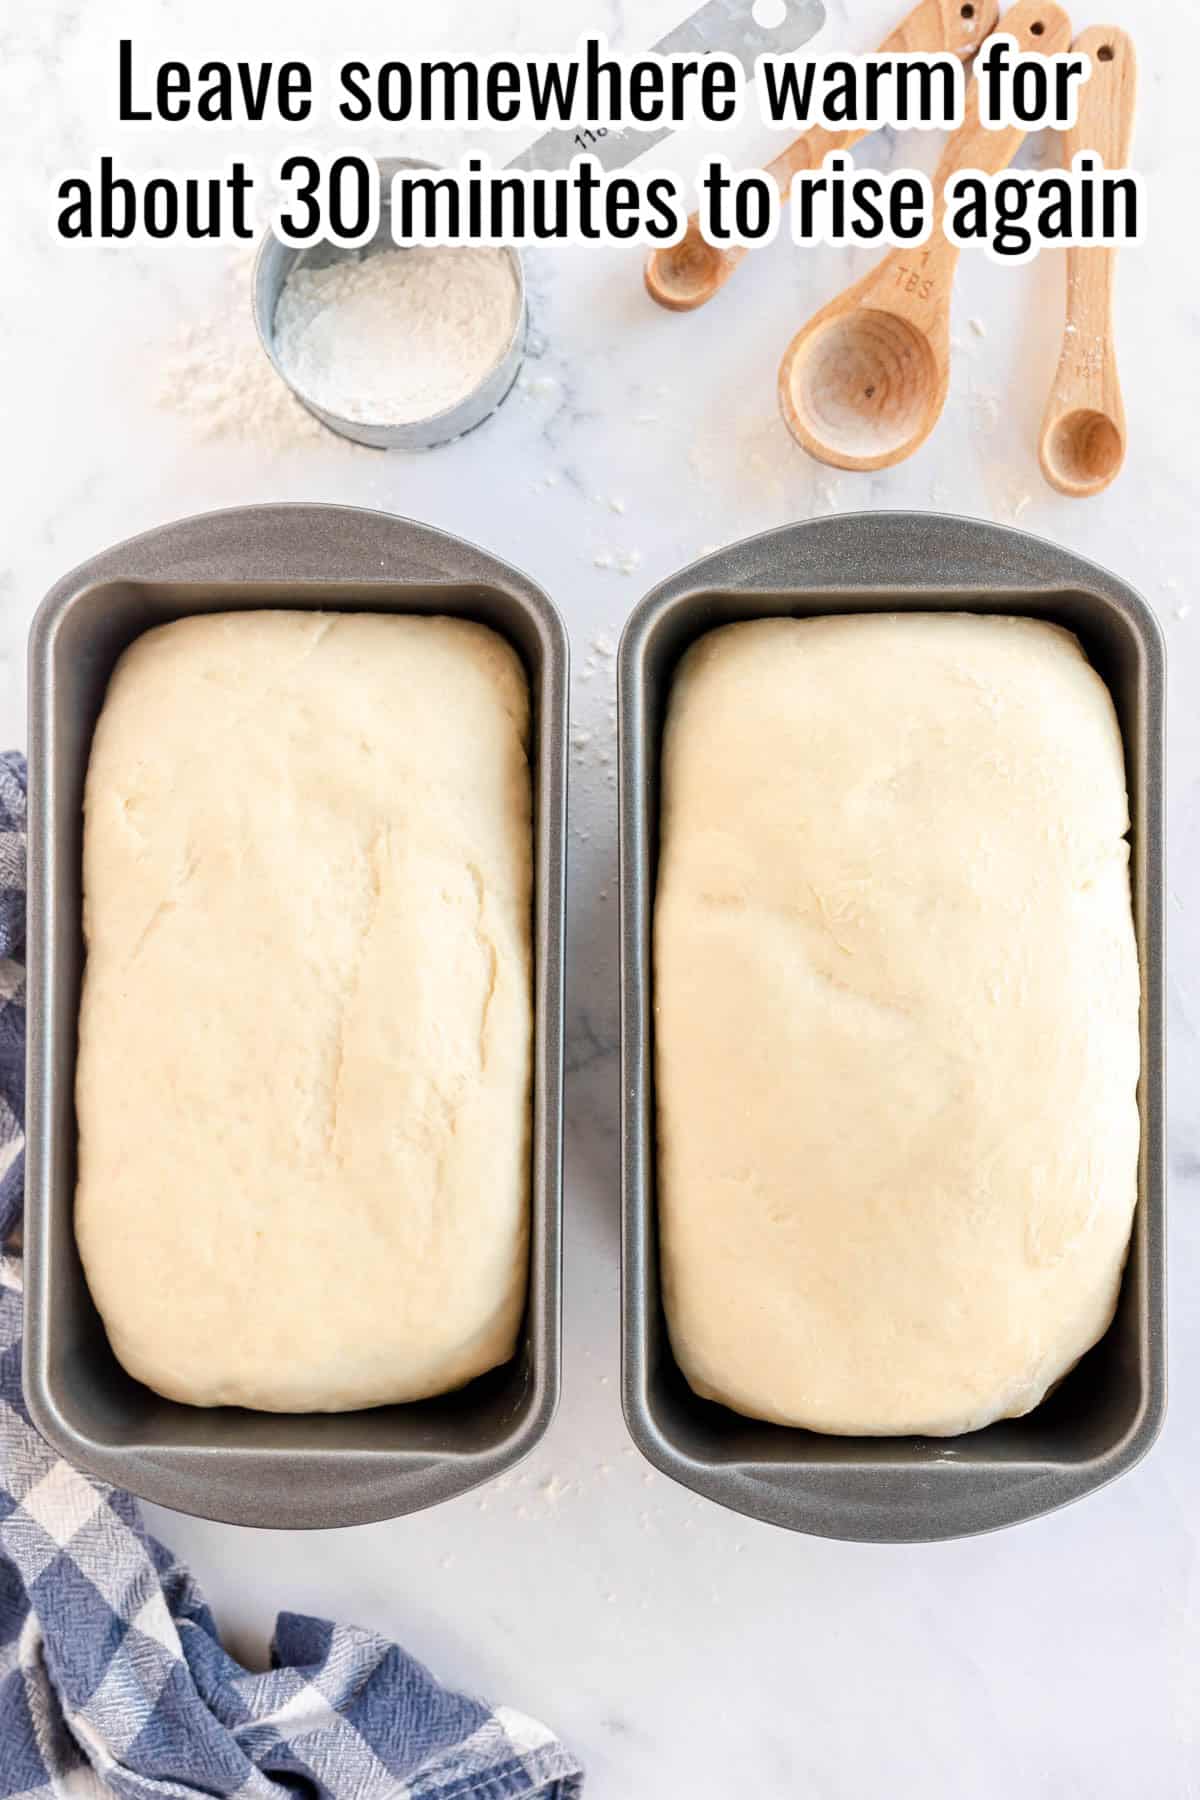 Two bread dough loaves in pans with a towel and utensils on a countertop. A caption above reads "Leave somewhere warm for about 30 minutes to rise again".